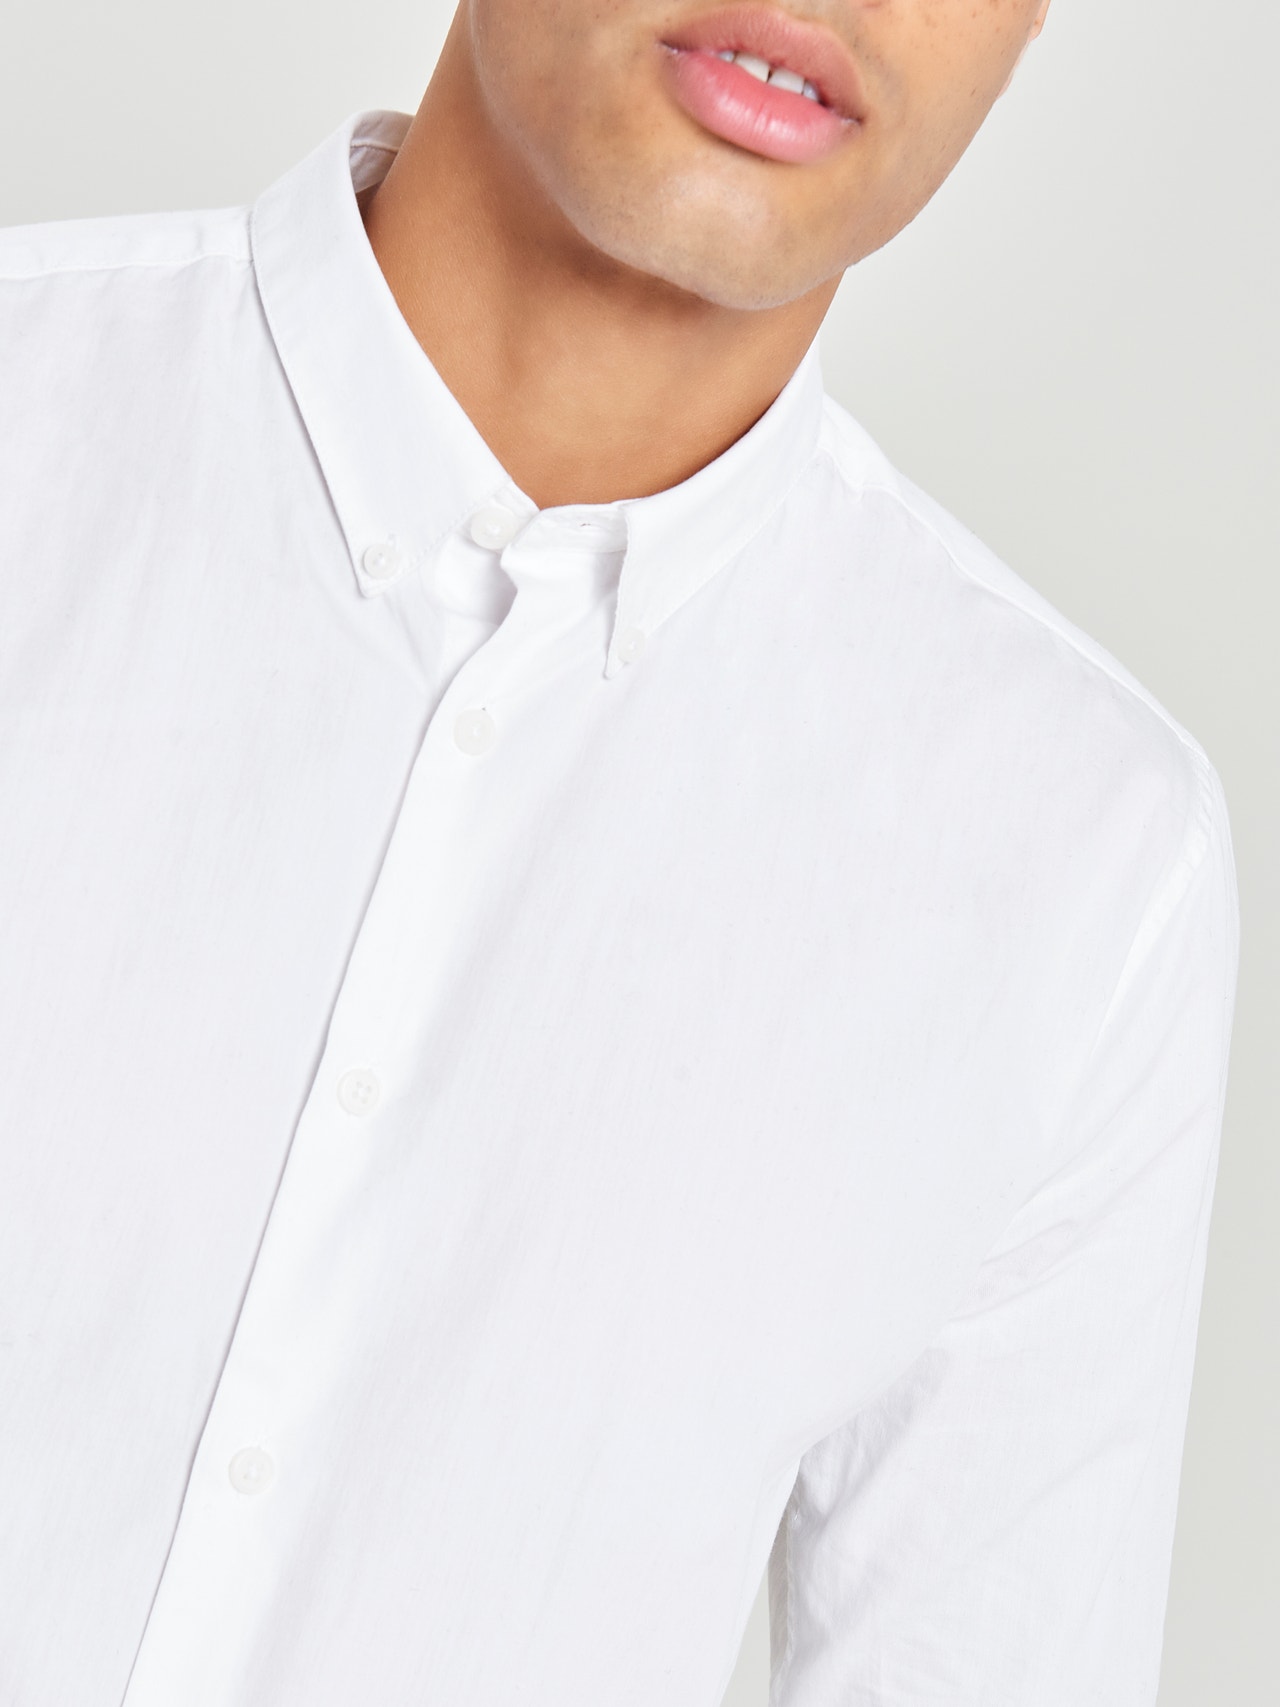 ONLY & SONS Classic shirt -White - 22010862